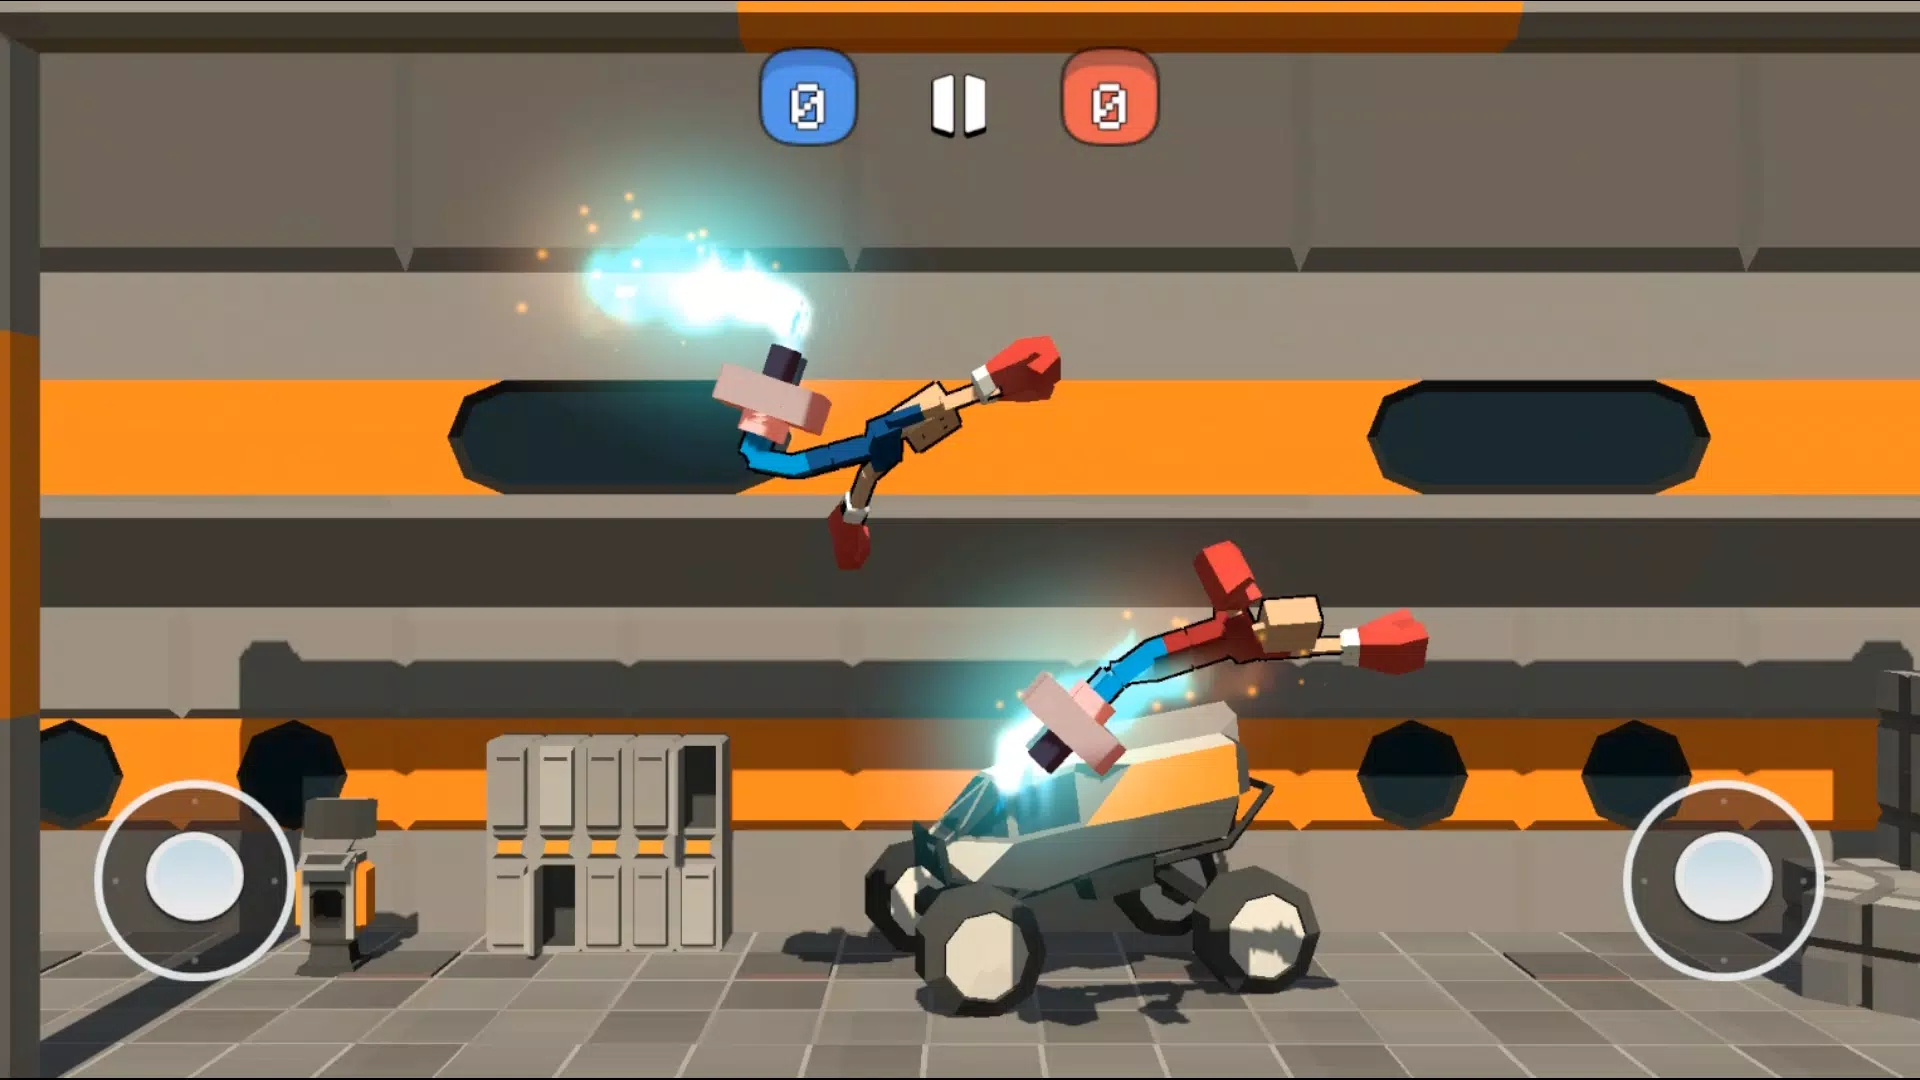 Play Puppet Fighter 2 Player  Free Online Games. KidzSearch.com